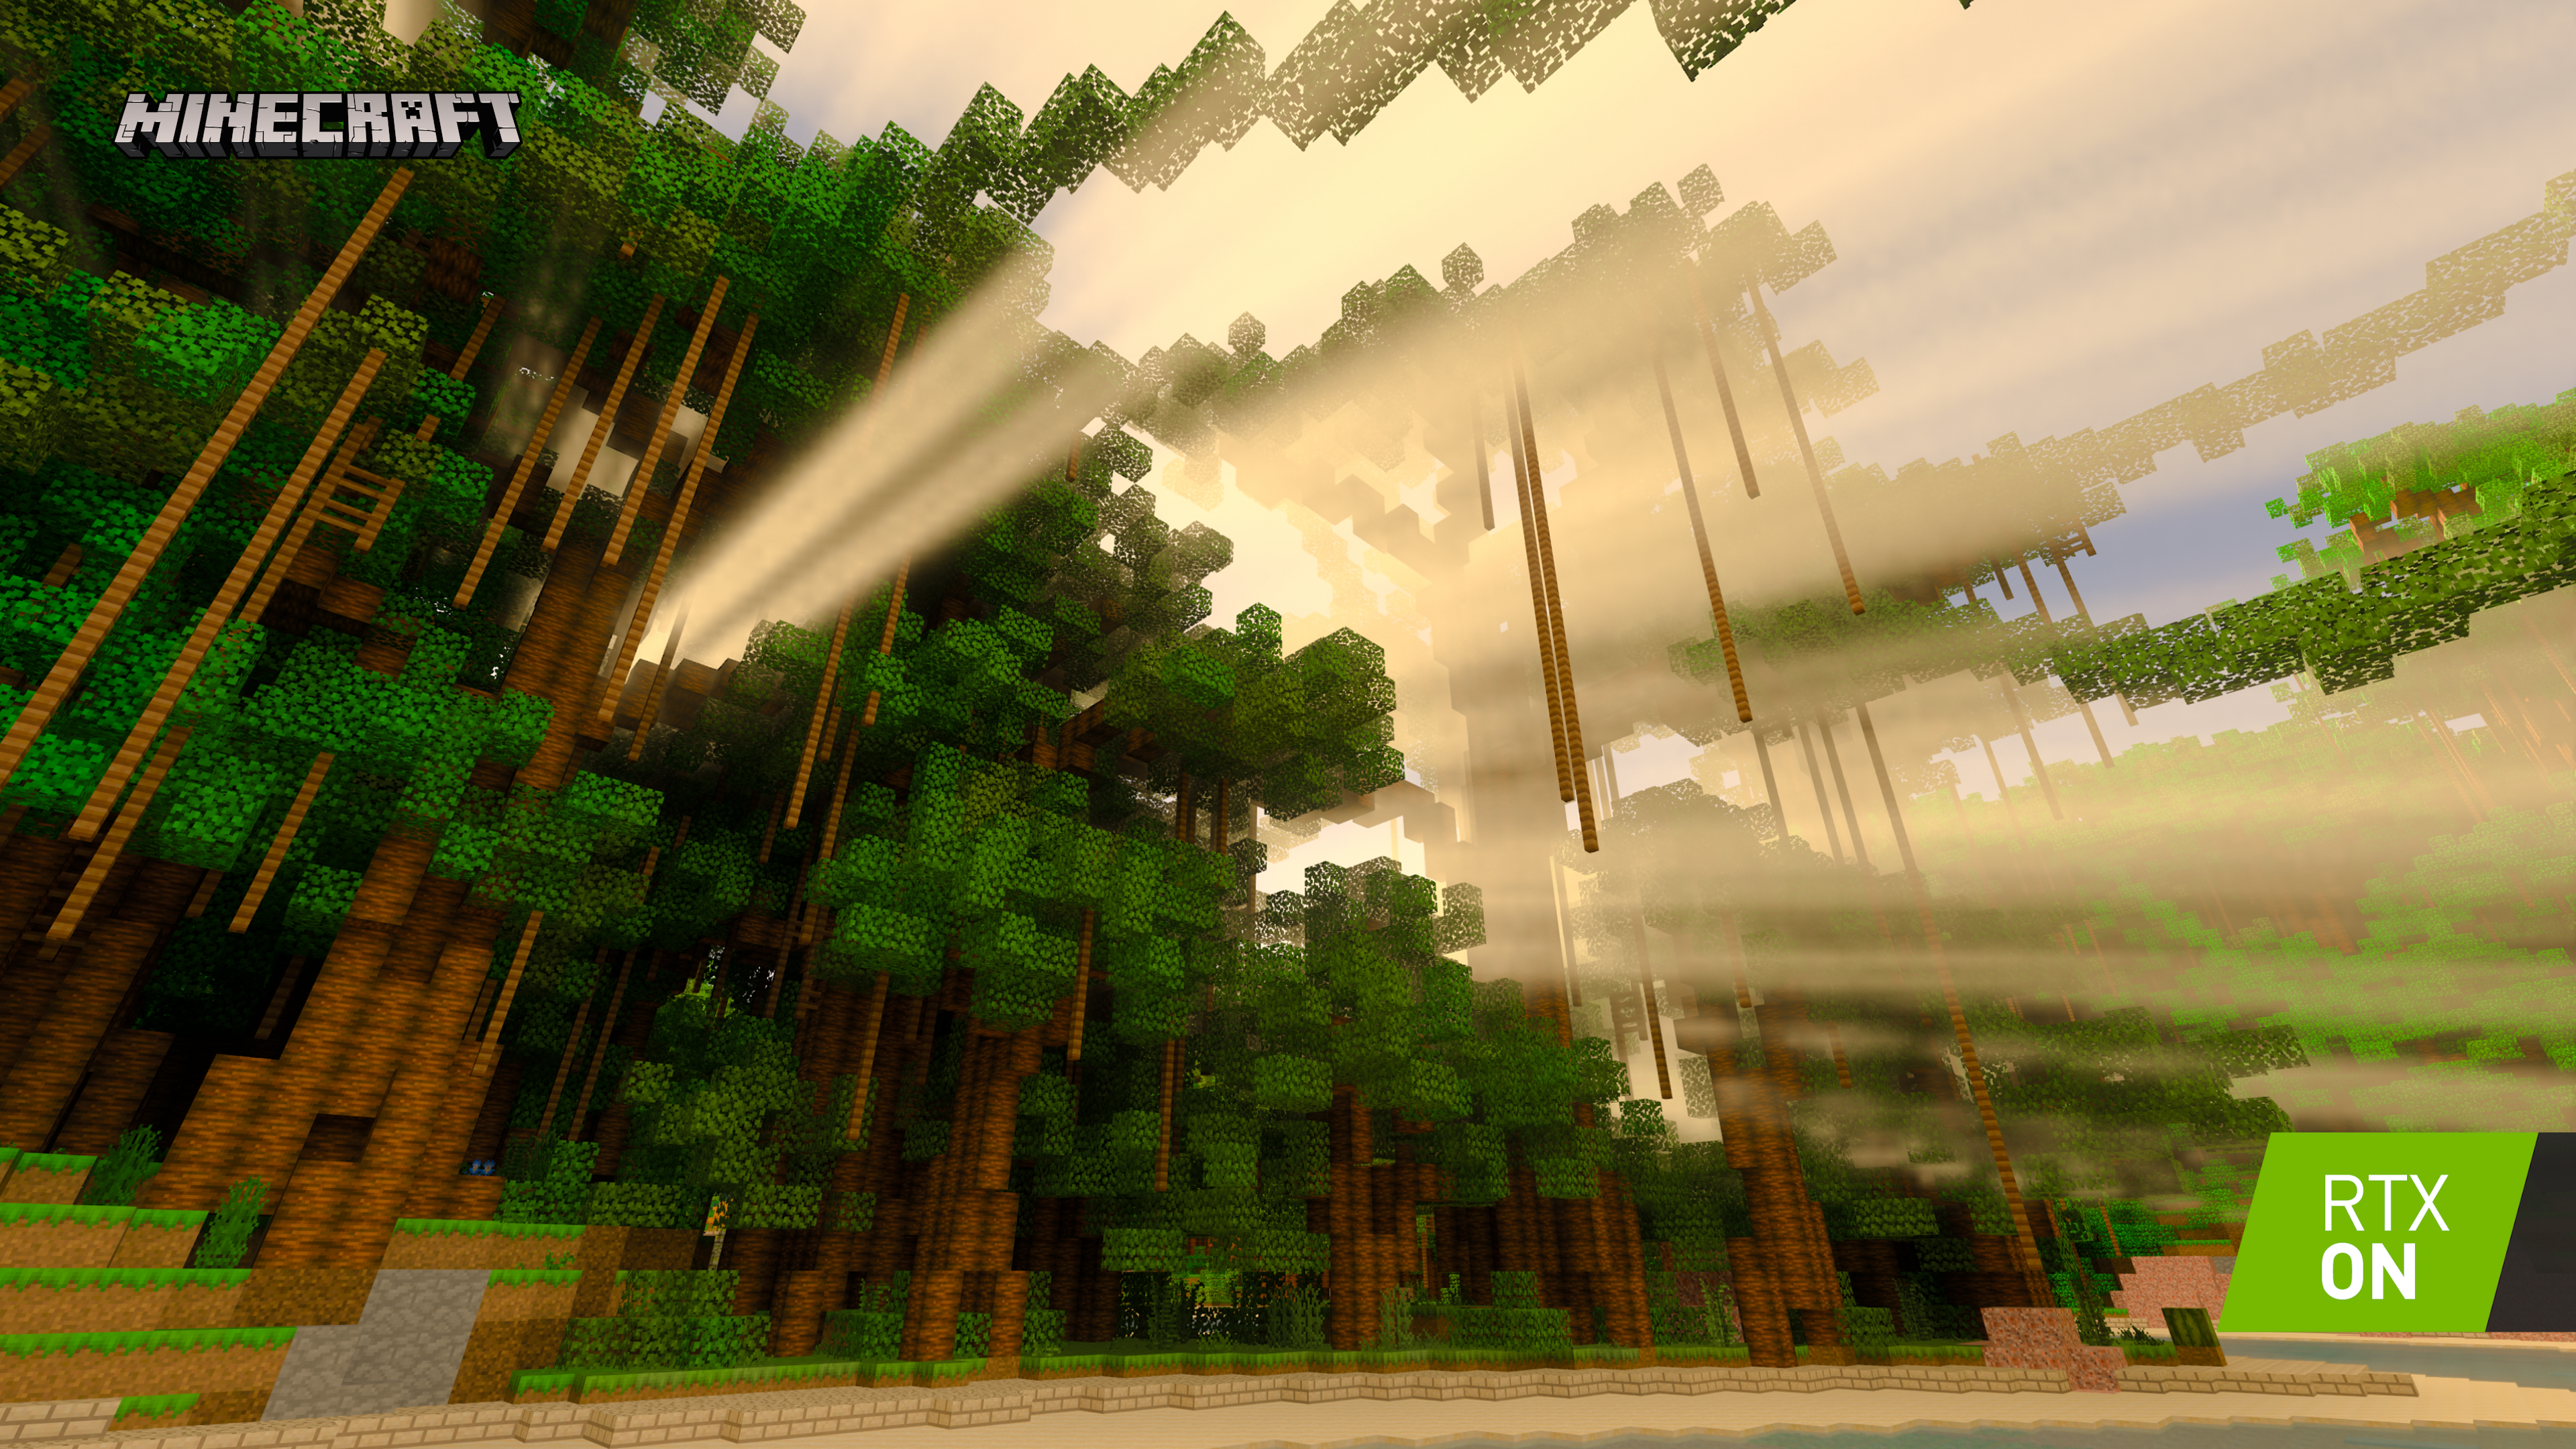 minecraft-with-rtx-beta-of-temples-and-totems-001-rtx-on.png